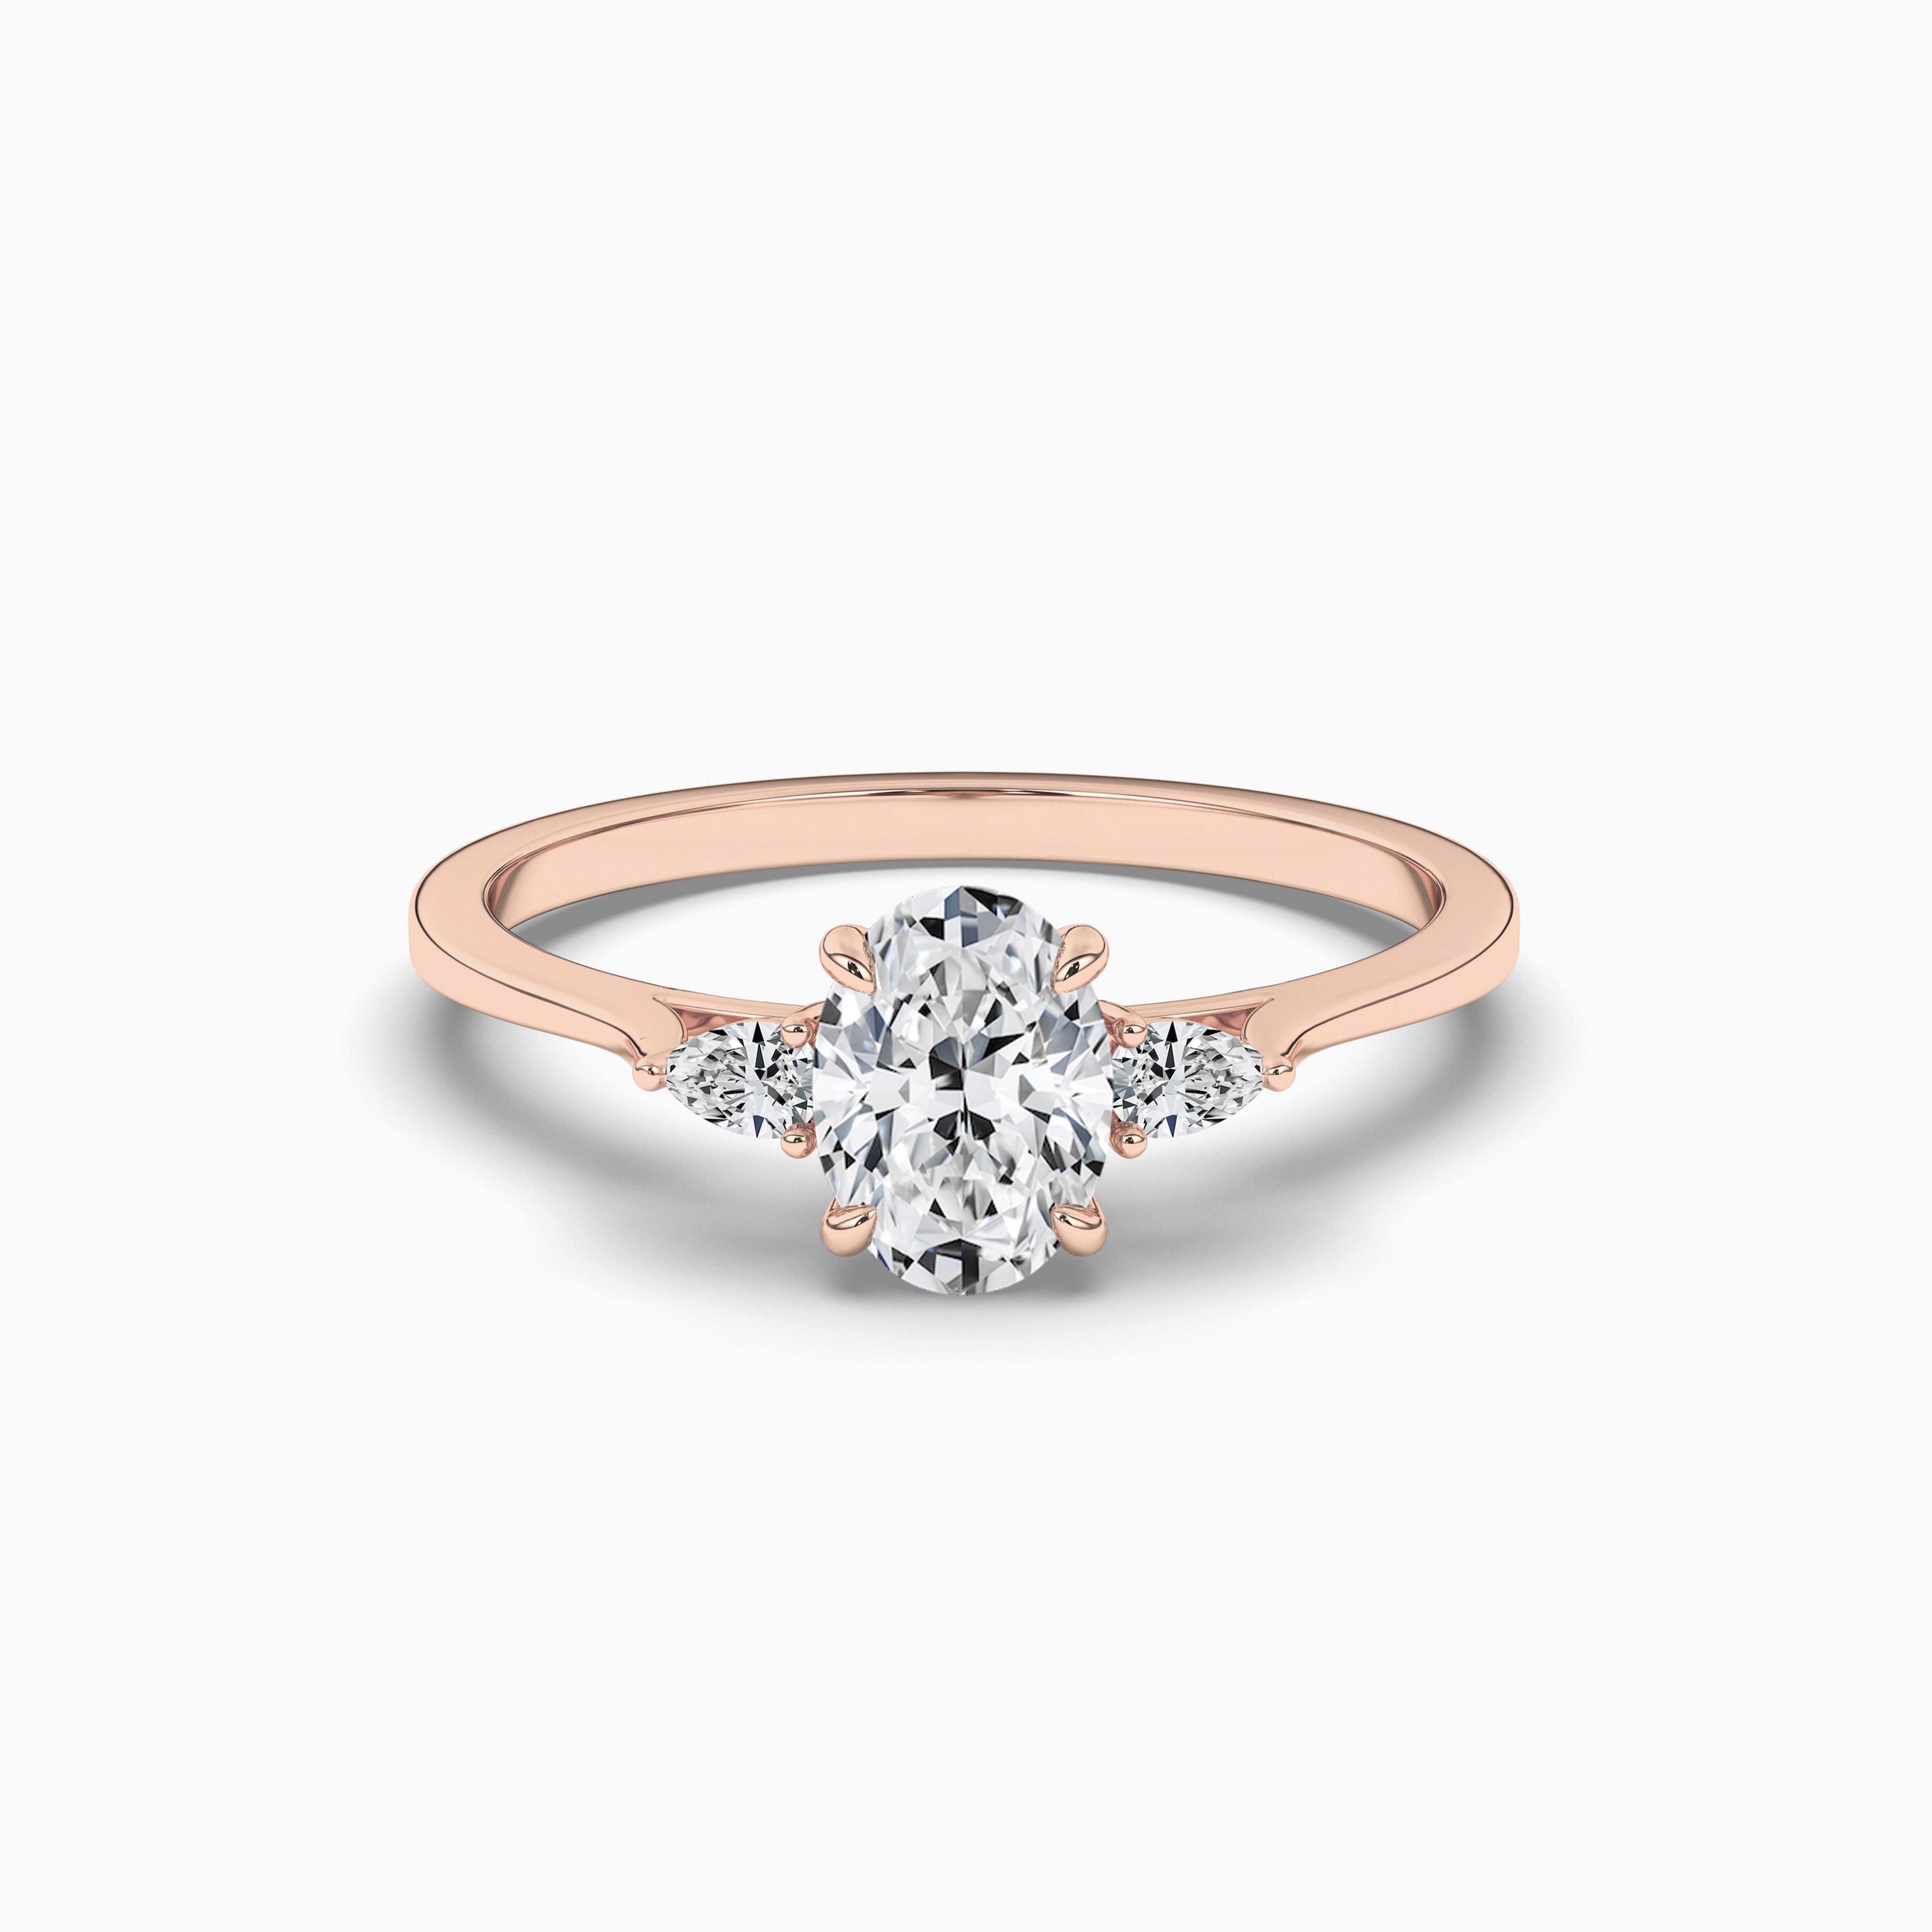 Oval Shape Diamond Engagement Ring With Pear Shape Side Stones